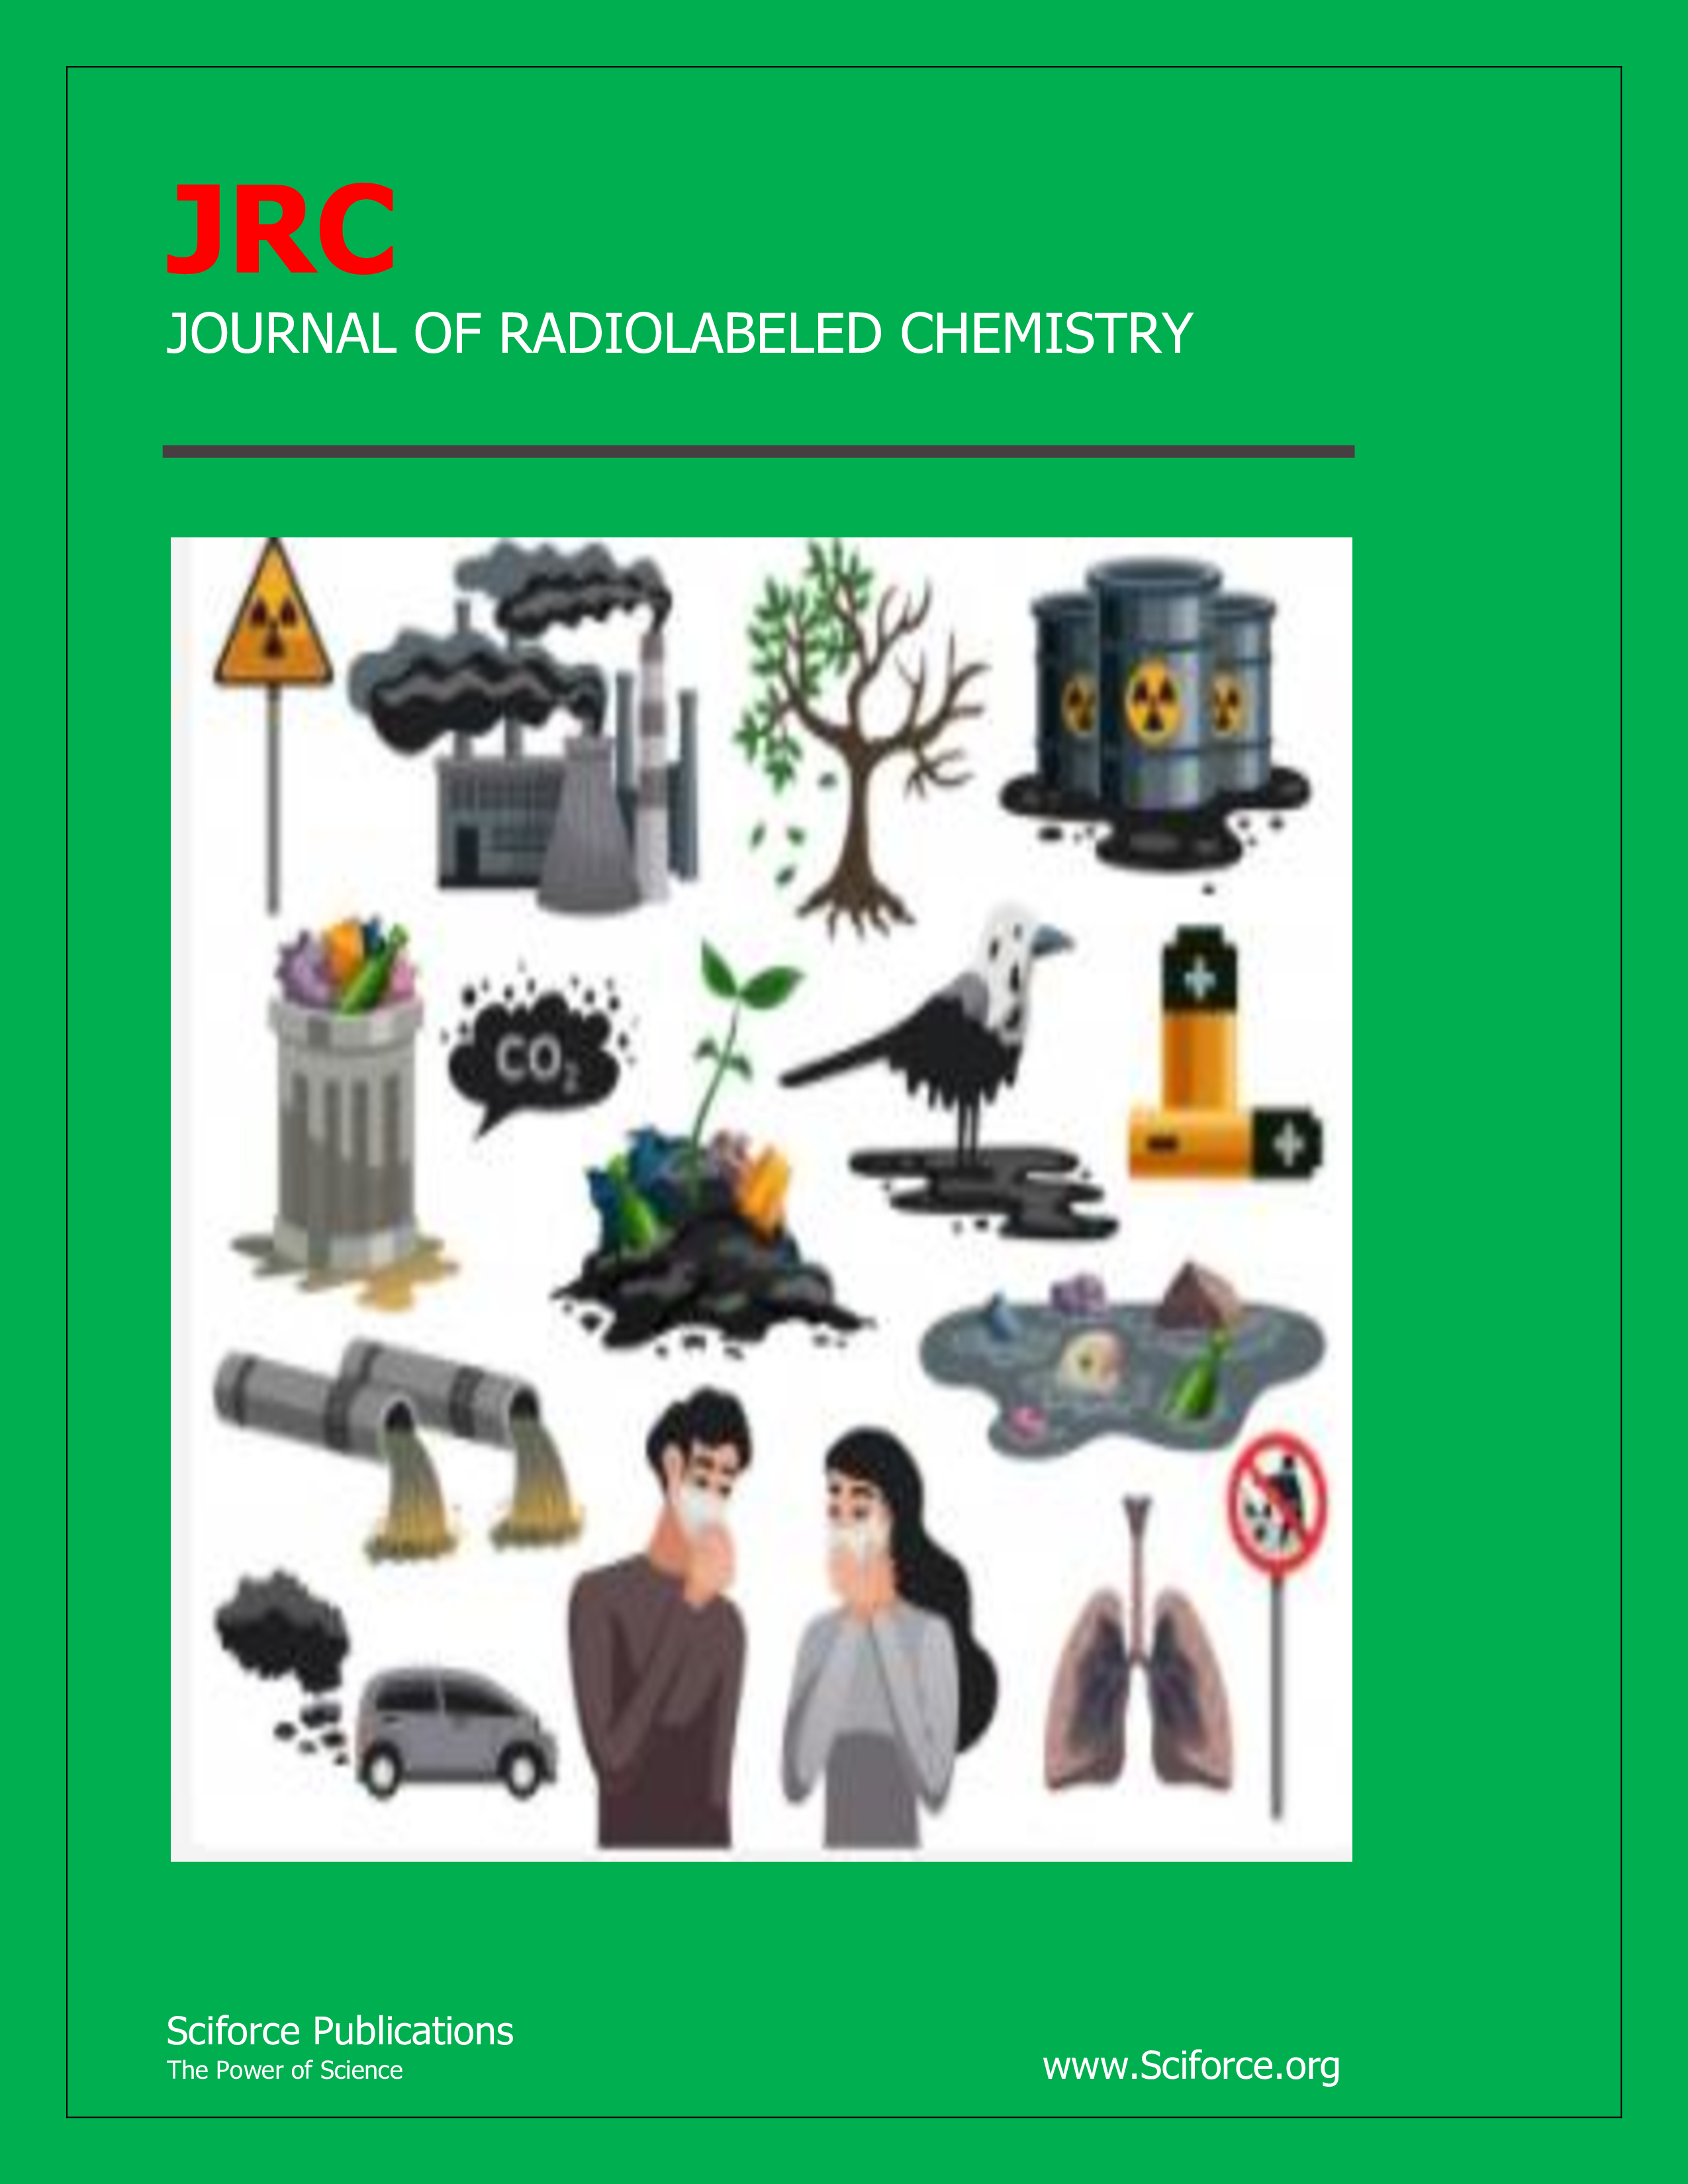 Journal of Radiolabeled Chemistry